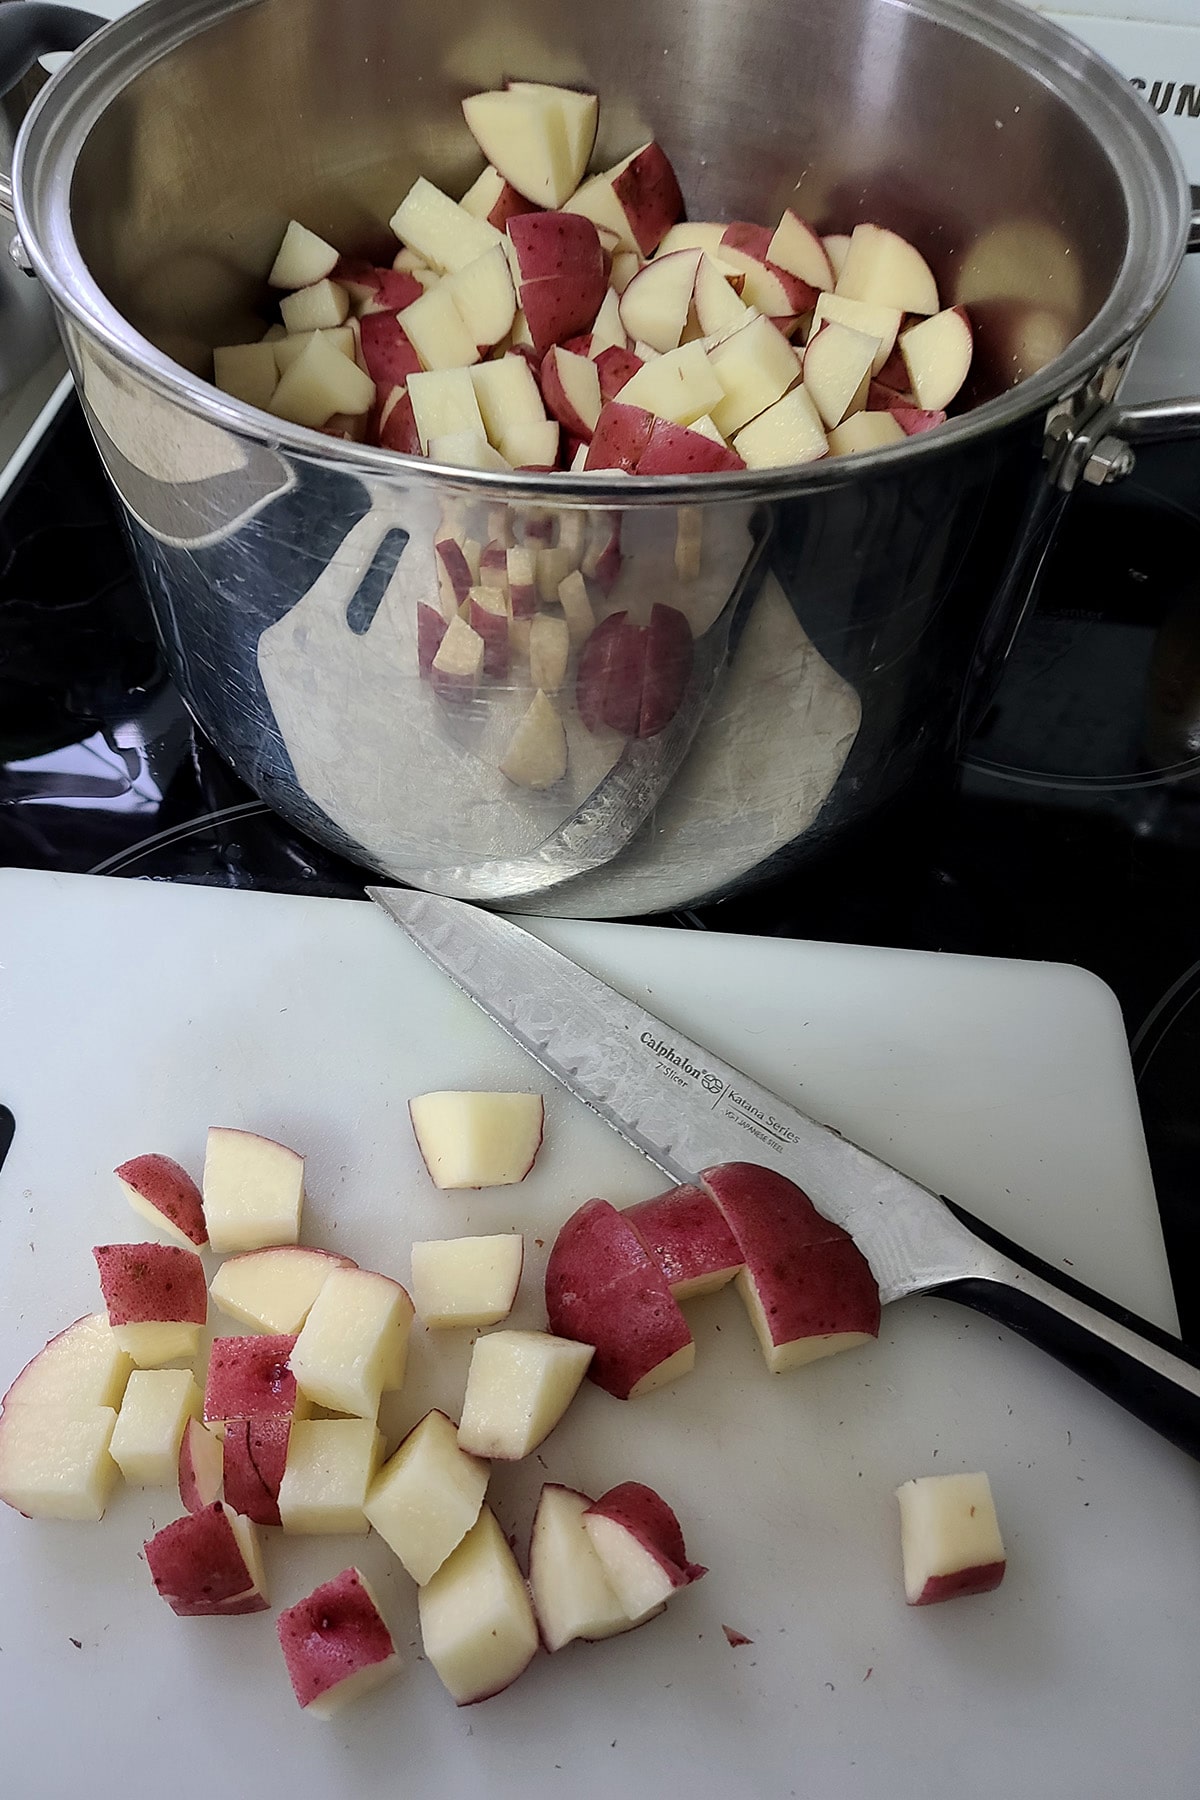 A cutting board with chopped red potatoes on it, in front of a large pot with chopped potatoes in it.